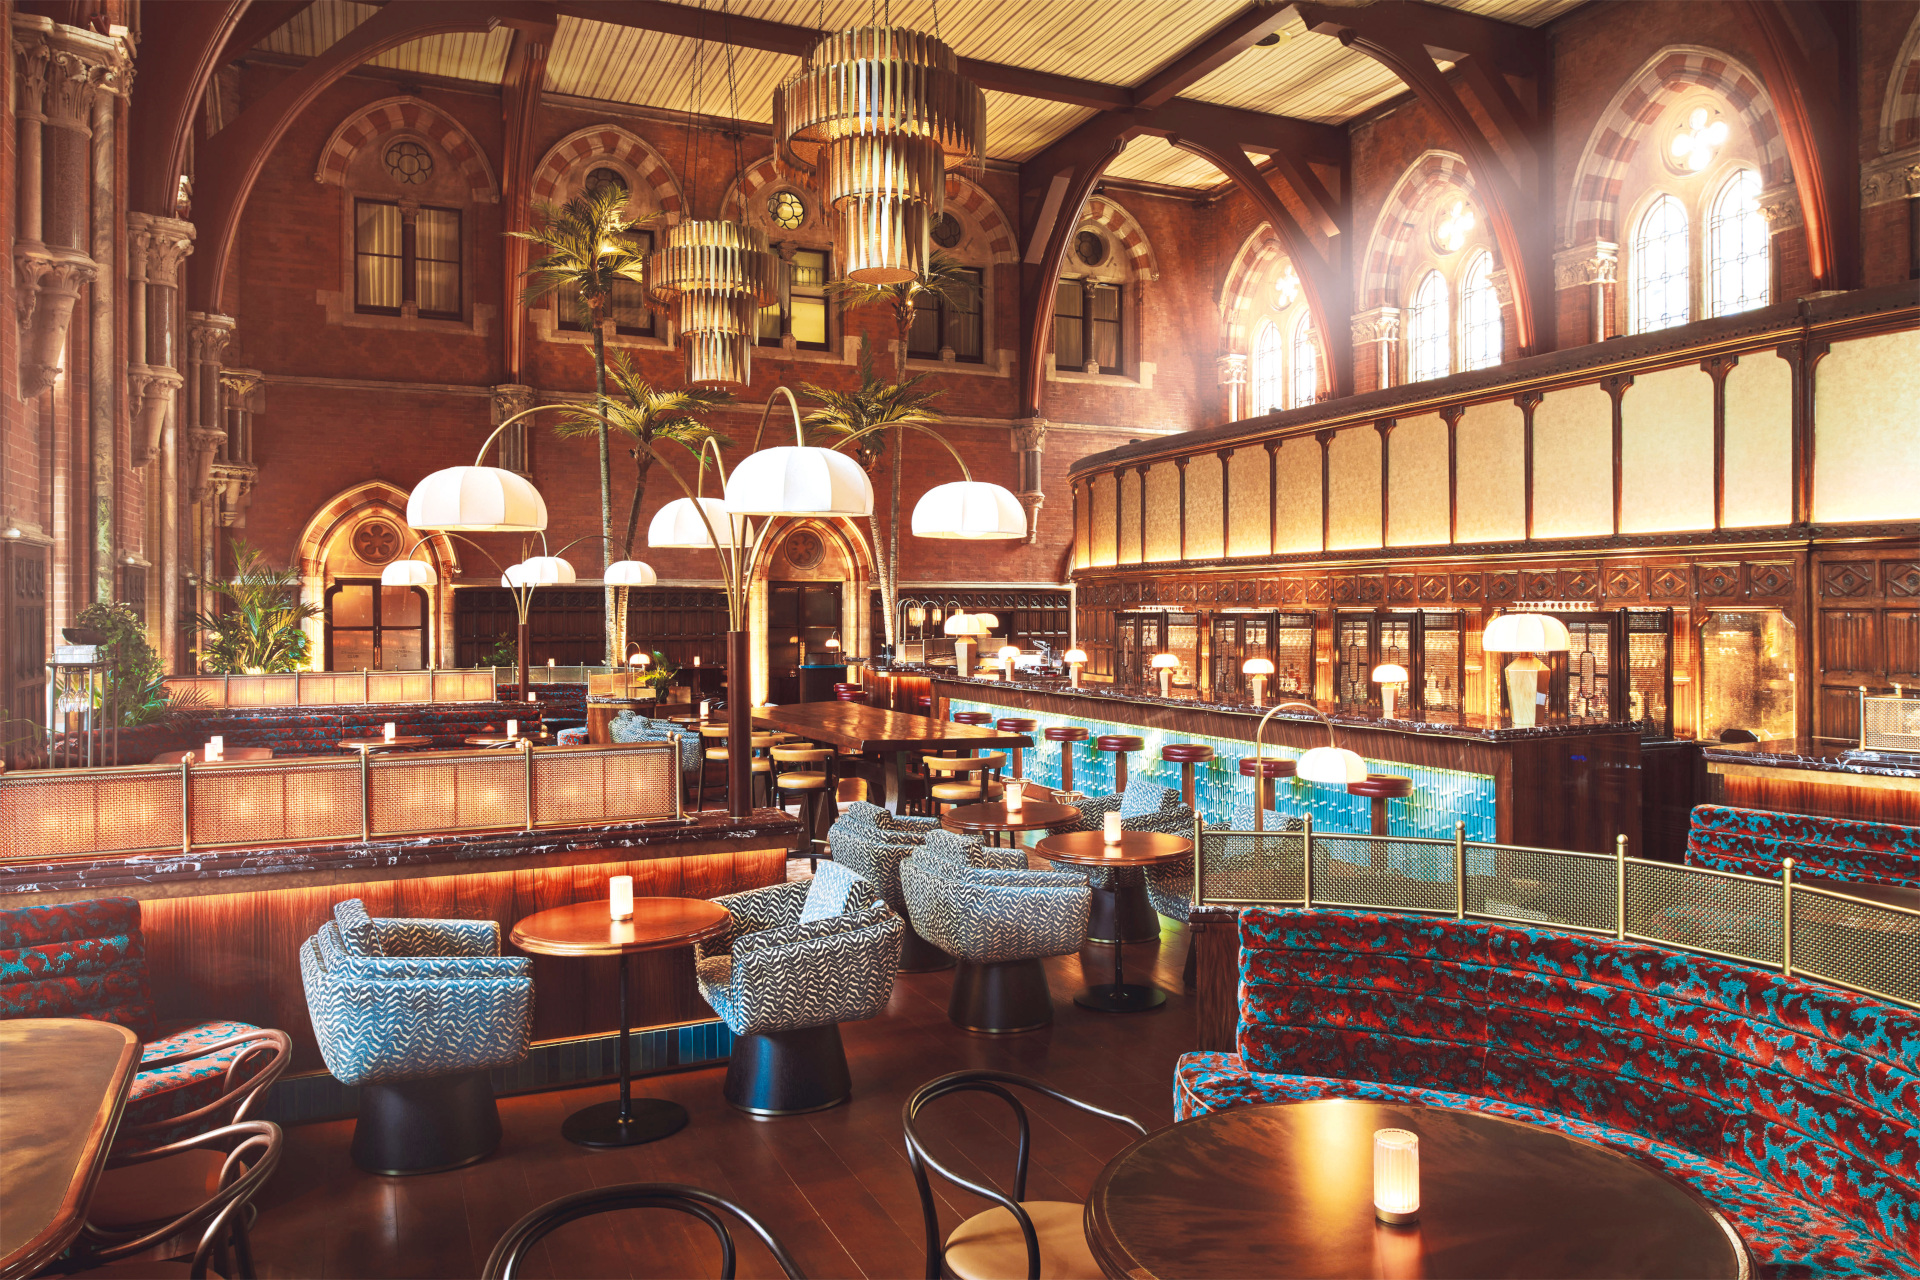 Interior shot of The Booking Office, a twentieth century style bar